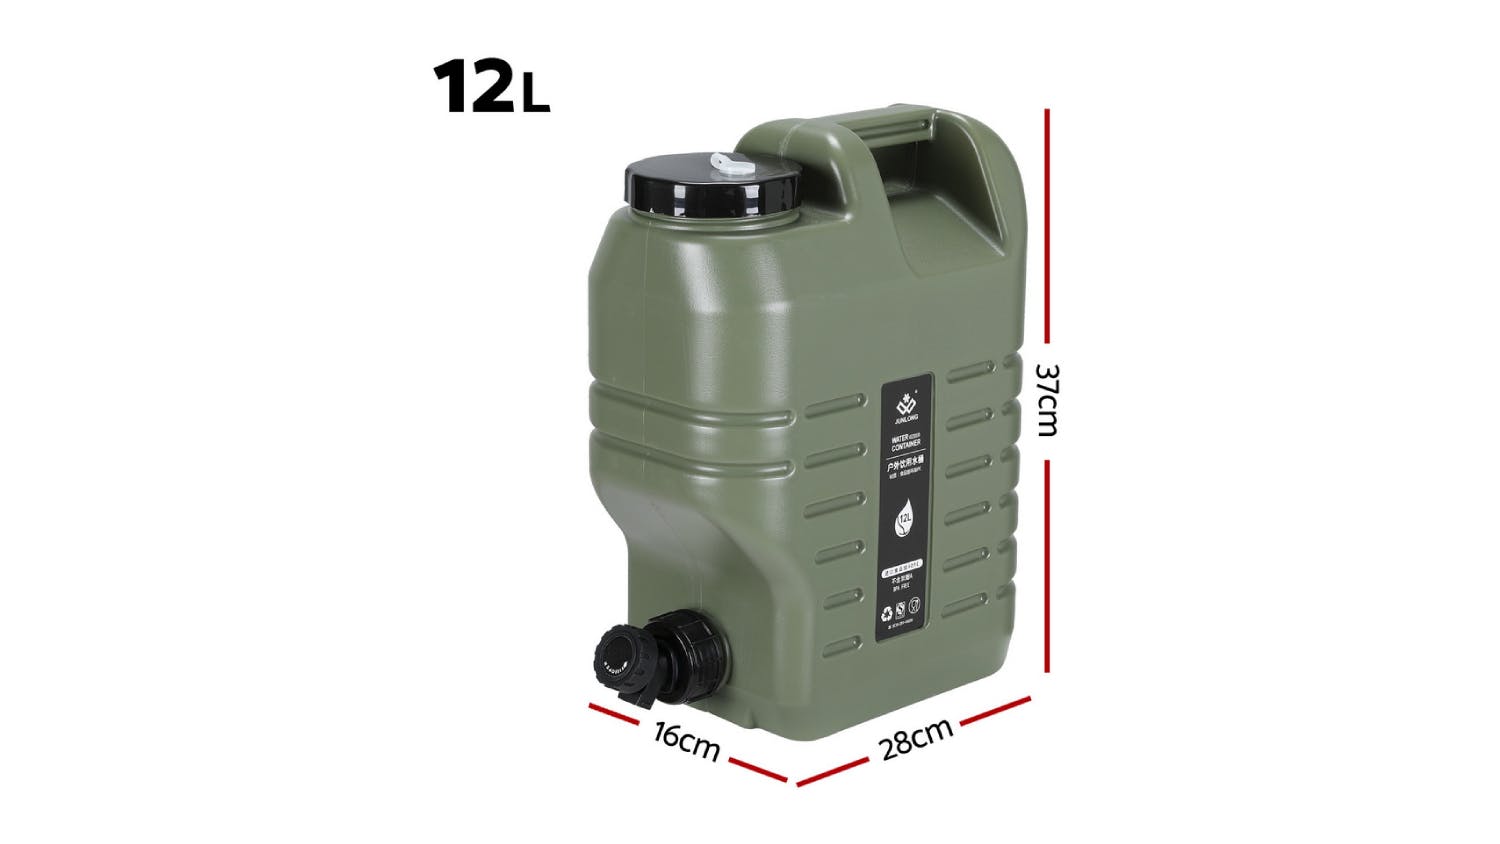 Weisshorn Sturdy Outdoor Water Cannister 12L with Spigot, Cleaning Brush - Camo Green